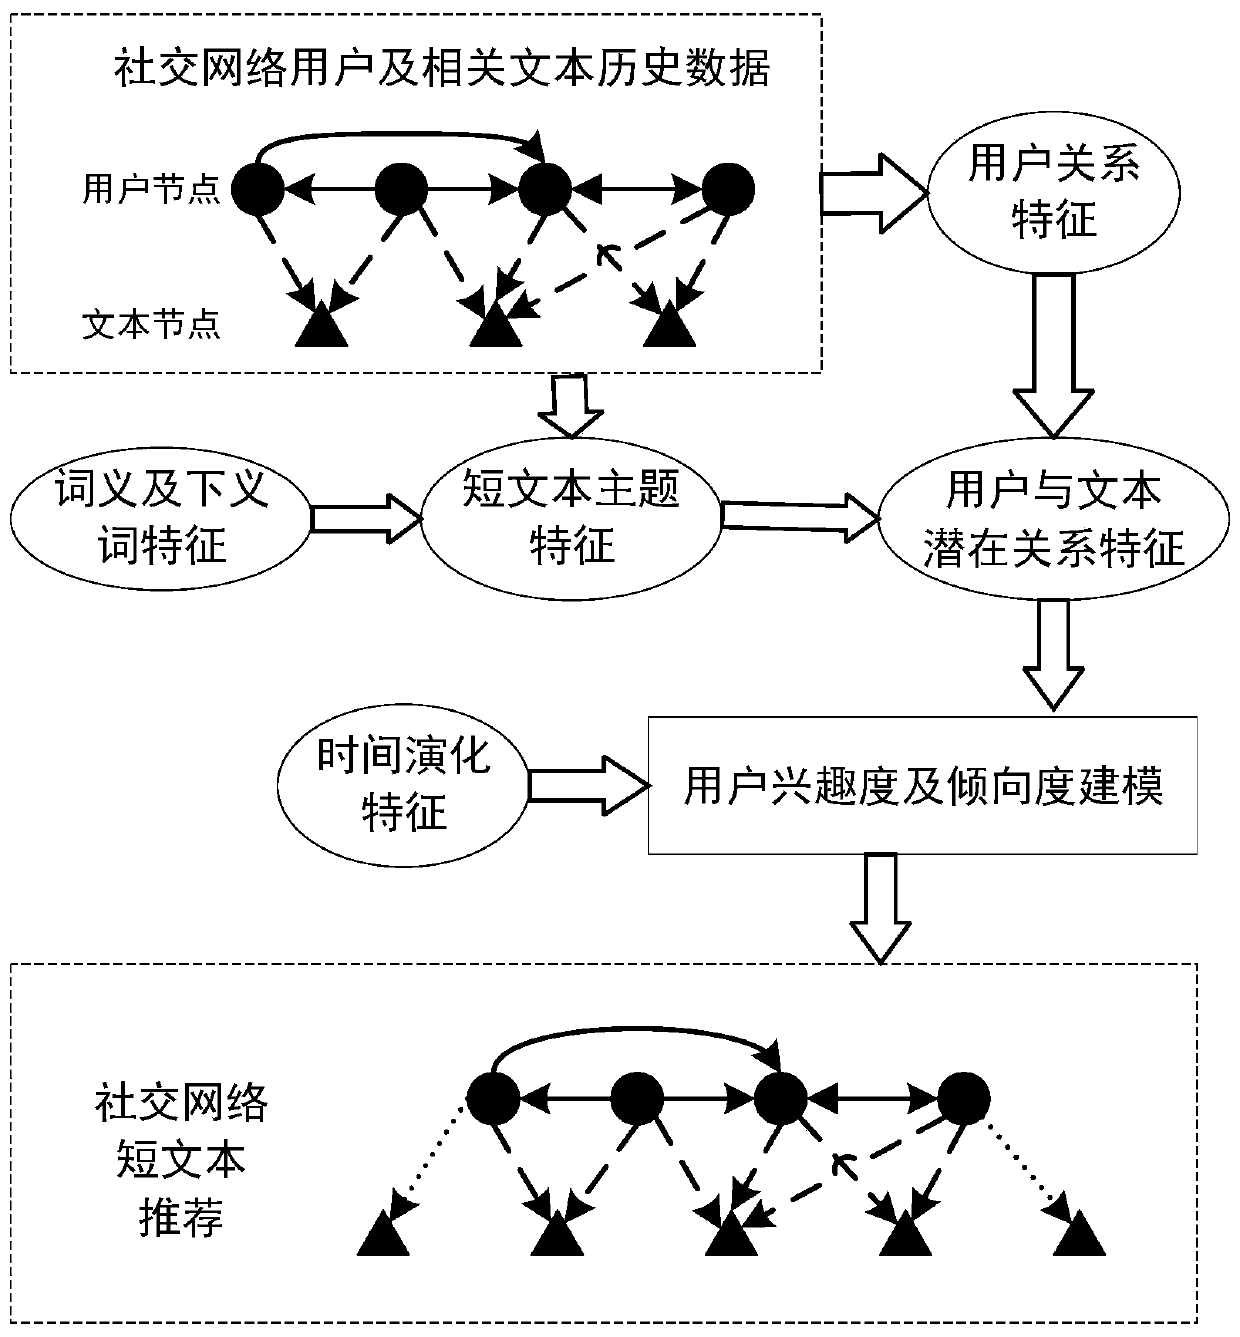 A social network short text recommendation method based on a word meaning topic model